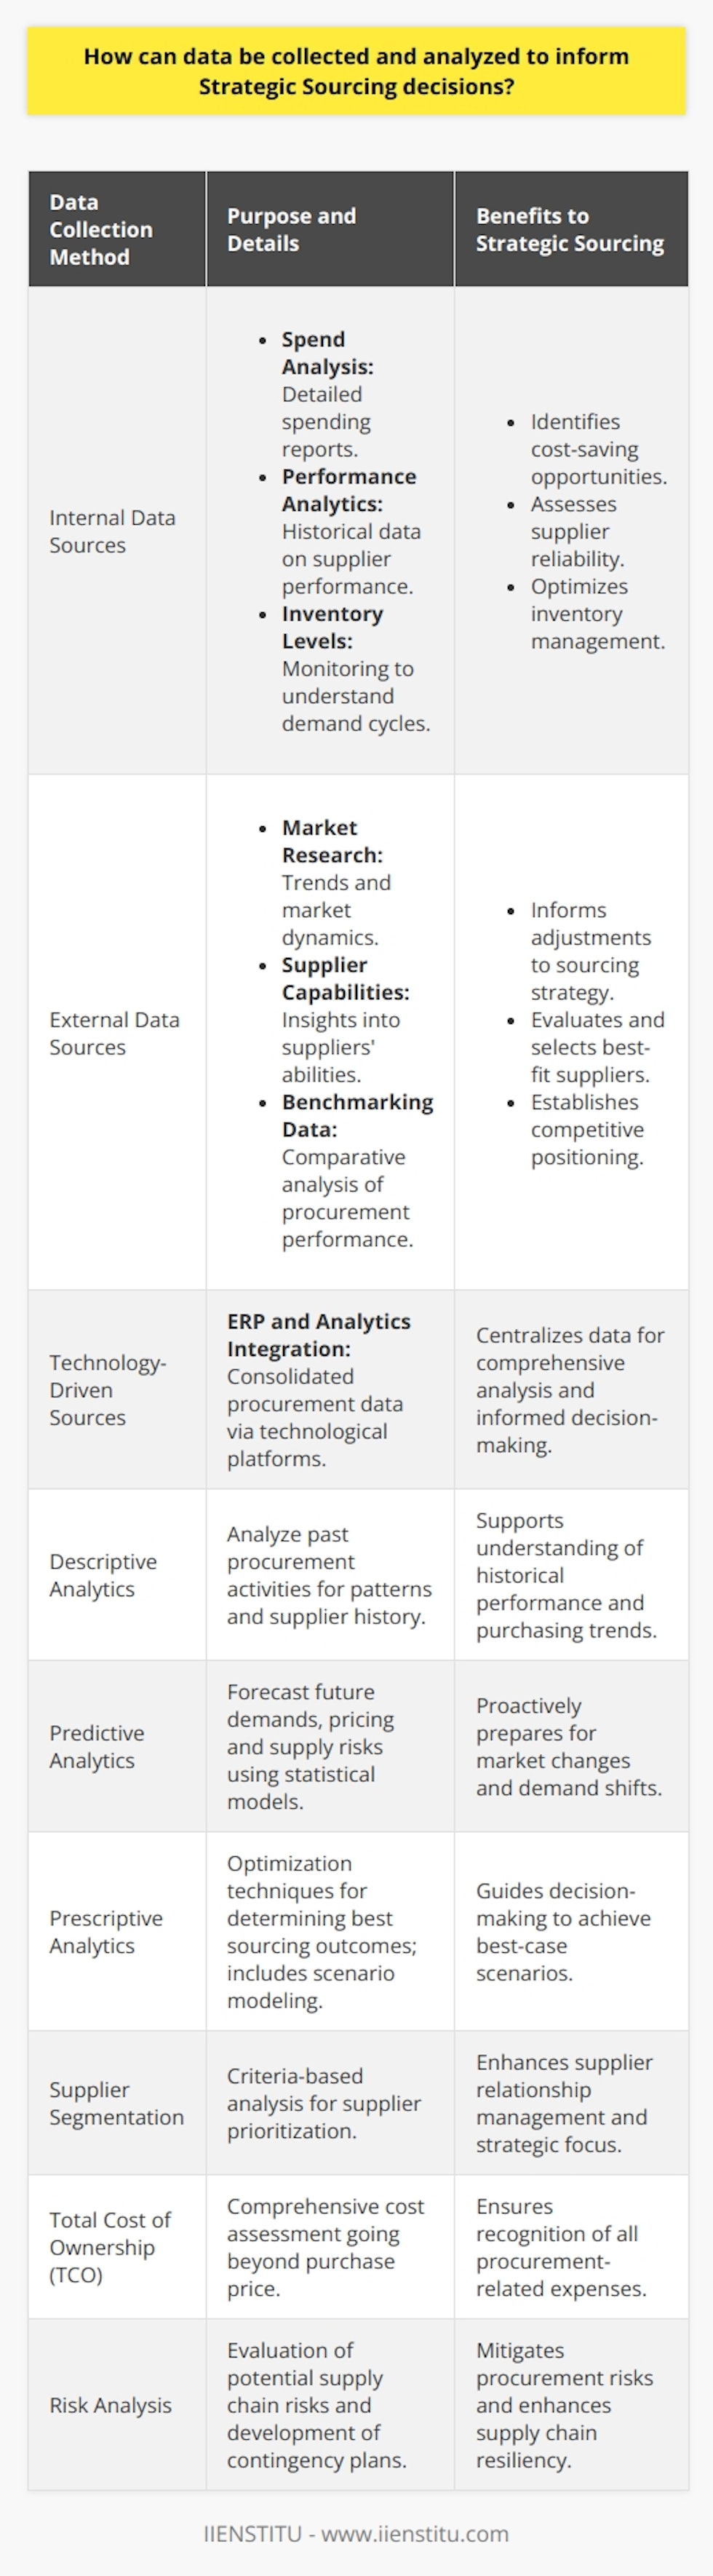 Strategic sourcing is a methodical and data-driven approach for optimizing an organization's supply chain activities. By leveraging comprehensive, accurate, and relevant data, organizations can make more informed decisions about procurement that align with their overall business strategy. Here's how data can be collected and analyzed to bolster strategic sourcing decisions:**Data Collection for Strategic Sourcing:**1. **Internal Data Sources:**   - **Spend Analysis:** Collect detailed reports about current spending within the organization. This can reveal what is being bought, in what quantities, and at what price.   - **Performance Analytics:** Evaluate historical performance data of existing suppliers to determine their reliability, quality, service, and compliance.   - **Inventory Levels:** Monitor stock inventory to analyze the demand cycle, lead times, and stock-out incidents, which can help in optimizing inventory to fit organizational needs.2. **External Data Sources:**   - **Market Research:** Keep abreast of market dynamics, such as changes in availability, cost drivers, product innovation, and industry trends, which can influence supply chain strategies.   - **Supplier Capabilities:** Gather intelligence on potential suppliers including their financial stability, technological capabilities, geographic reach, and reputation.   - **Benchmarking Data:** Analyze how the organization's procurement performance compares to industry standards or how competitive the current bids are against the industry average.3. **Technology-Driven Data Sources:**   - **Integration of ERPs and Analytics Platforms:** Use of an integrated enterprise resource planning (ERP) system can streamline data collection across departments for a holistic view of procurement needs.**Data Analysis for Strategic Sourcing:**1. **Descriptive Analytics:**   - Conduct a historical analysis to understand past behaviors, purchasing patterns, and supplier performance. 2. **Predictive Analytics:**   - Use statistical models and forecasts to anticipate future demand, price fluctuations, and supply risks.3. **Prescriptive Analytics:**   - Employ optimization techniques to ascertain the best outcomes. For example, scenario modeling can help in understanding the implications of different sourcing strategies.4. **Supplier Segmentation:**   - Analyze suppliers based on various criteria (e.g., strategic importance, spend category) to prioritize and manage supplier relationships.5. **Total Cost of Ownership (TCO):**   - Identify and quantify all cost factors to determine the true cost of procuring a product or service, rather than just looking at the purchase price.6. **Risk Analysis:**   - Assess potential risks associated with suppliers or market conditions and develop contingency plans.**Application of Data Insights:**With the collected and synthesized data, organizations can take strategic actions such as:- **Negotiate Better Terms:** With a thorough understanding of pricing, quality, lead times, and supplier performance, organizations are in a stronger position to negotiate.  - **Supplier Consolidation:** Data may reveal opportunities to streamline the supplier base to cut costs and manage relationships more effectively.- **Performance-Based Contracting:** Establish contracts with suppliers based on data-backed performance metrics.- **Sustainable Procurement:** Integrate sustainability measures into strategic sourcing by analyzing data related to environmental and social impacts of suppliers.In summary, effective strategic sourcing hinges on the adept collection, analysis, and application of data to make decisions that support an organization’s procurement goals. By conducting spend analysis, market research, benchmarking, and leveraging technology for advanced analytics, organizations can reduce costs, mitigate risks, and build a robust supply chain that delivers competitive advantage.Educational platforms like IIENSTITU offer opportunities for professionals to enhance their skills in data analysis, forecasting, and strategic decision-making, which are critical in the realm of strategic sourcing. These skills enable procurement professionals to harness data effectively and implement strategic sourcing methodologies that drive value and efficiency in their organizations.